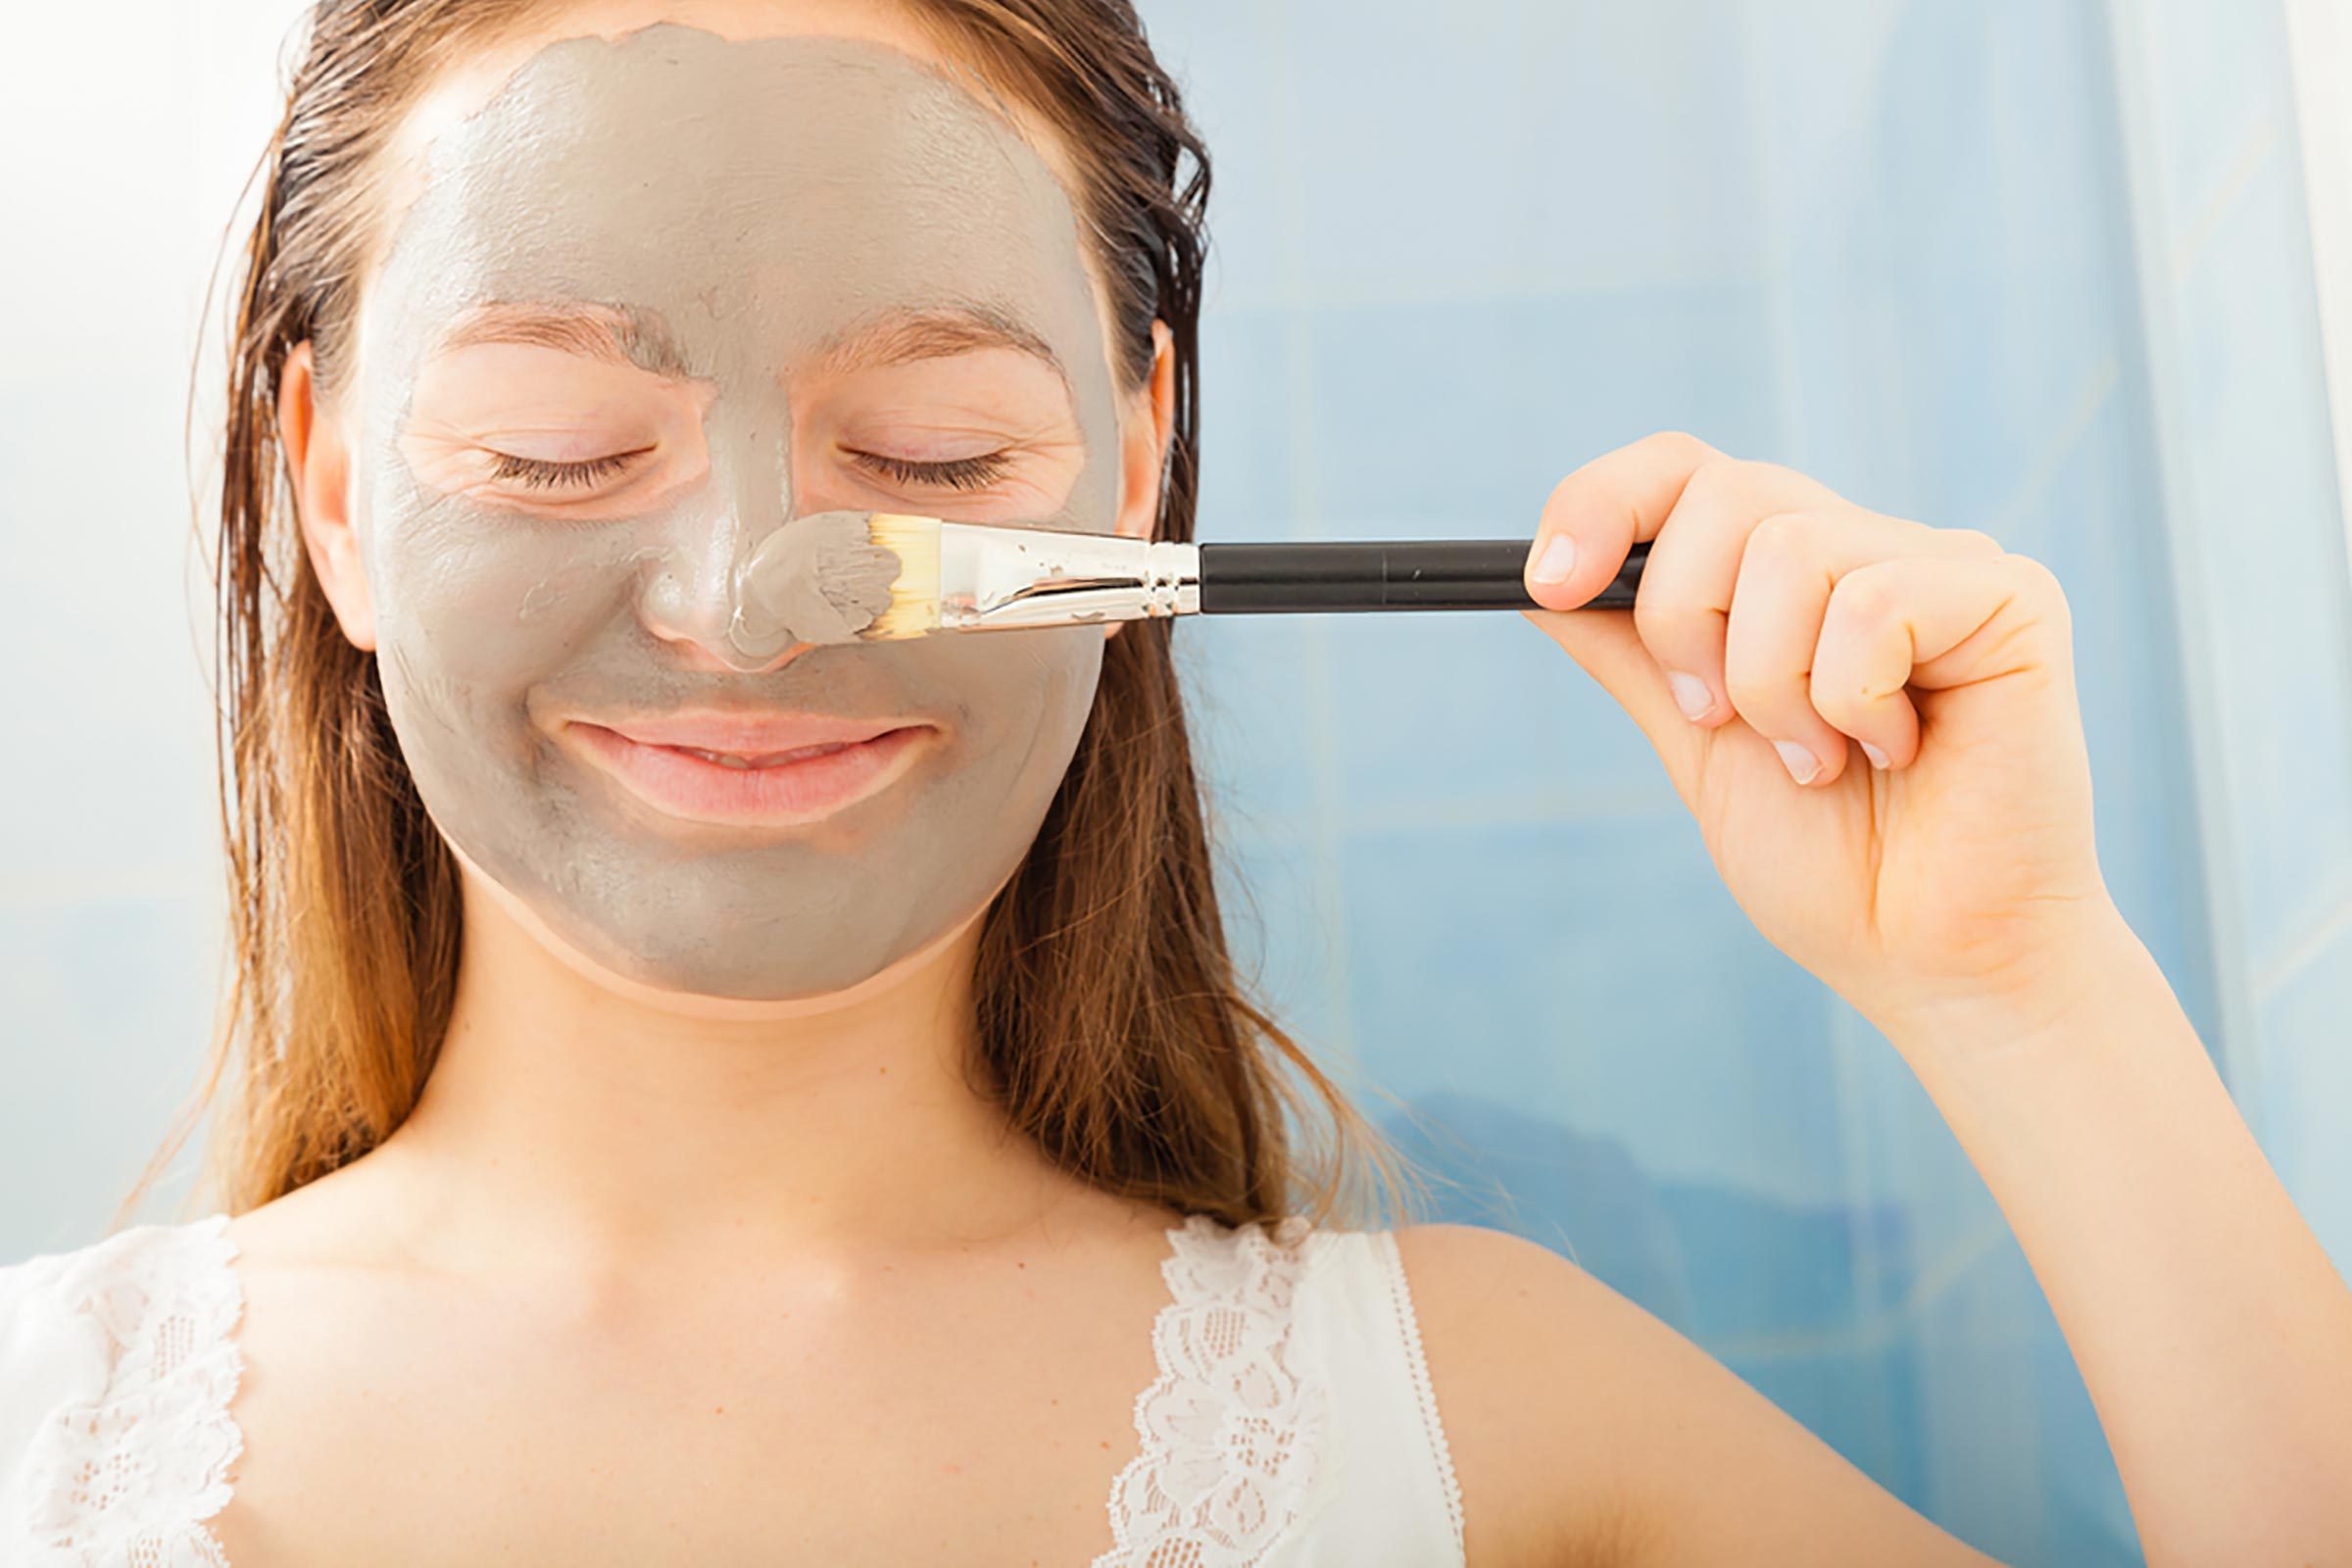 9 DIY Facial Treatments You Can Safely Do at Home The Healthy hq picture